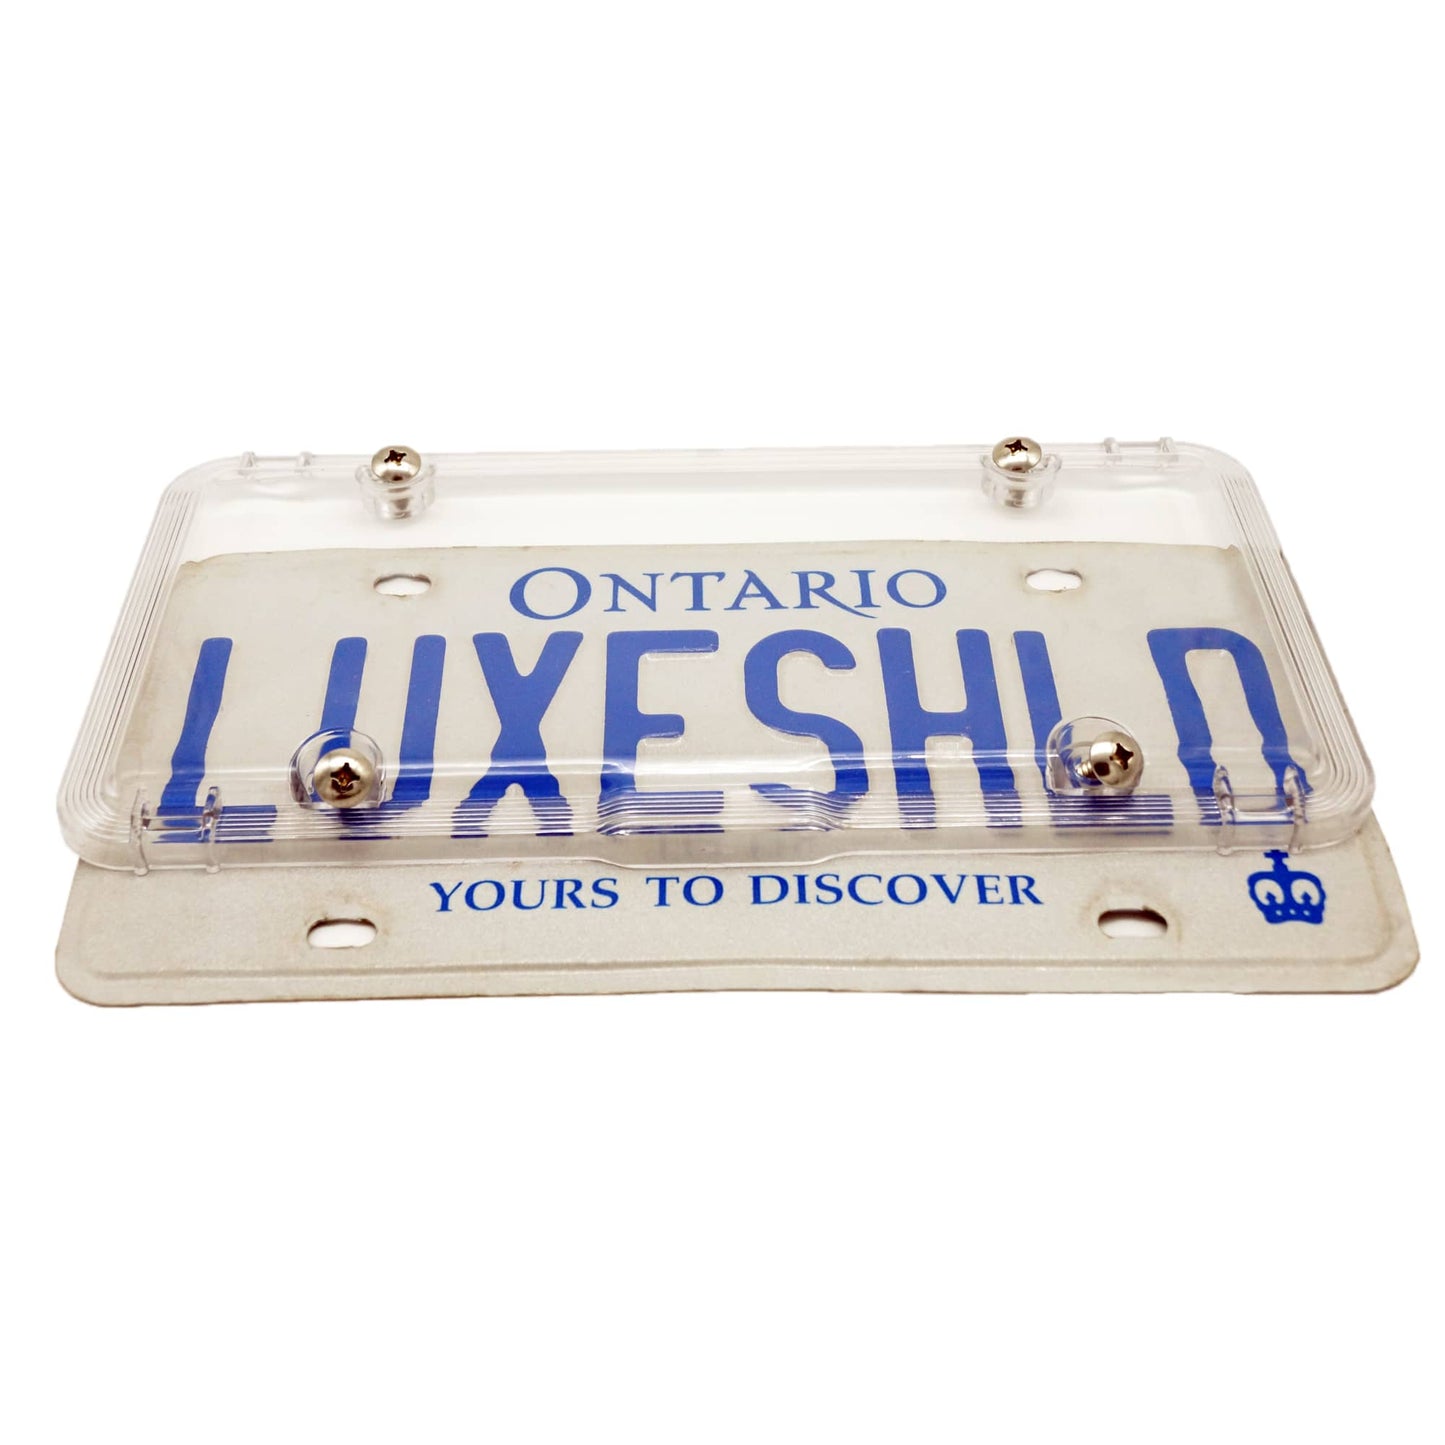 Luxe Shield, Premium Clear License Plate Covers (2-Pack) includes Stainless Screws